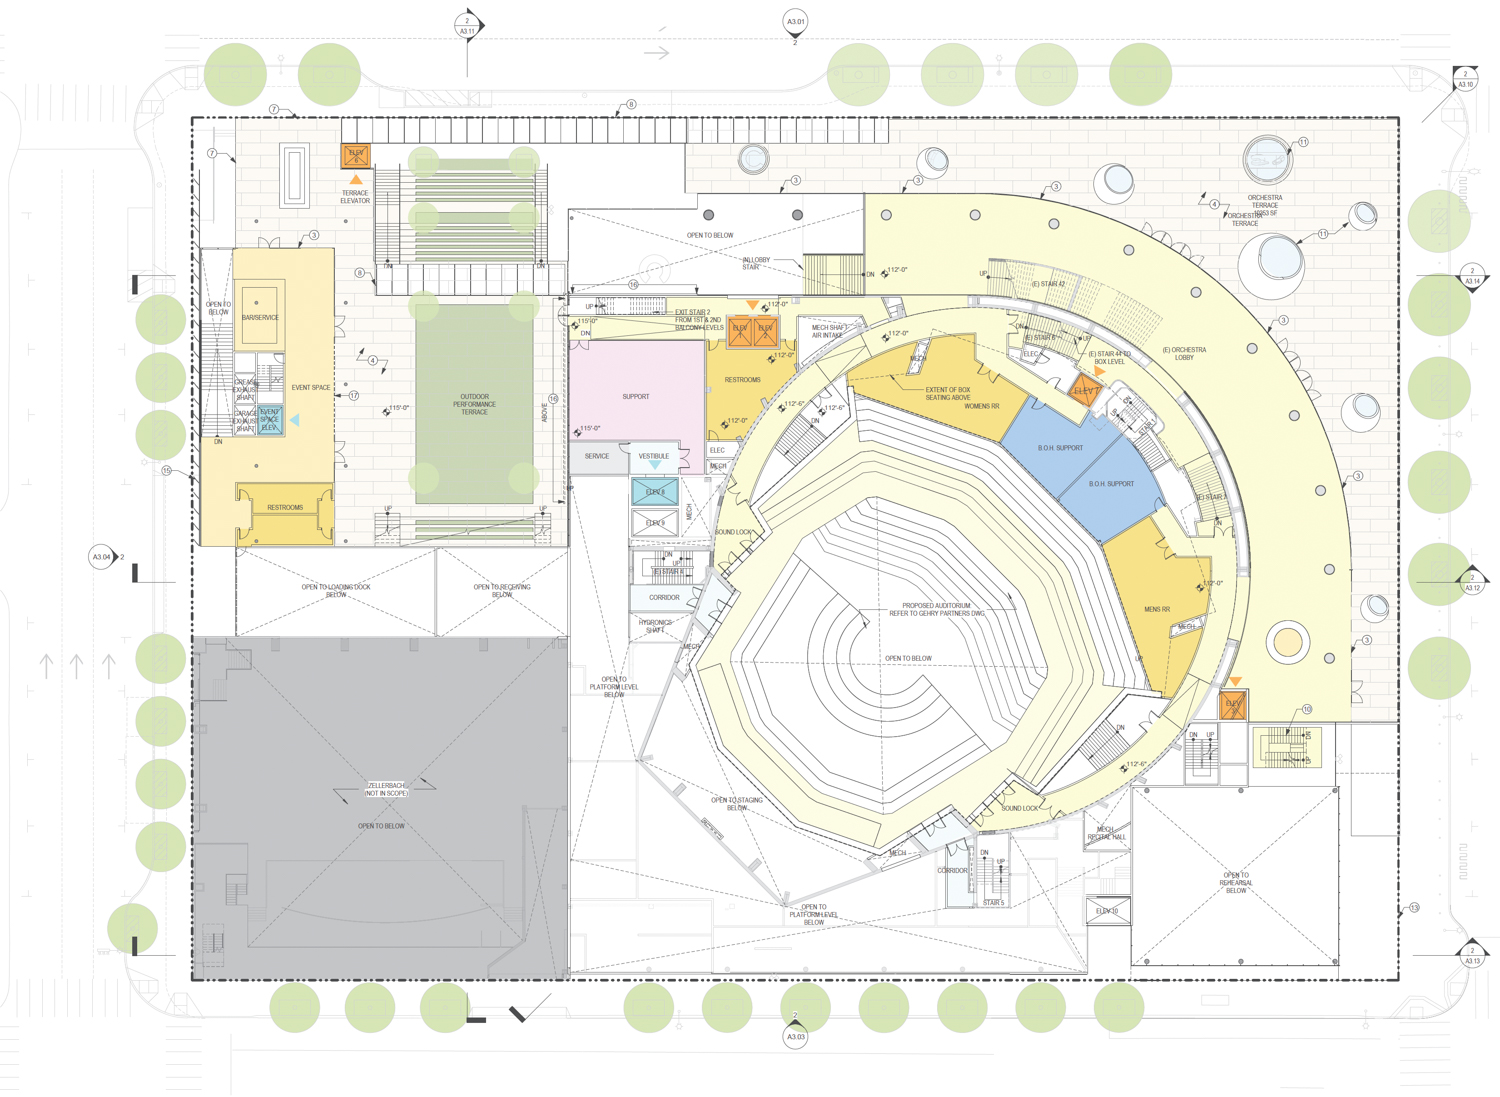 San Francisco Symphony Hall proposed orchestra-level floor plan, illustration by Cavagnero and Gehry